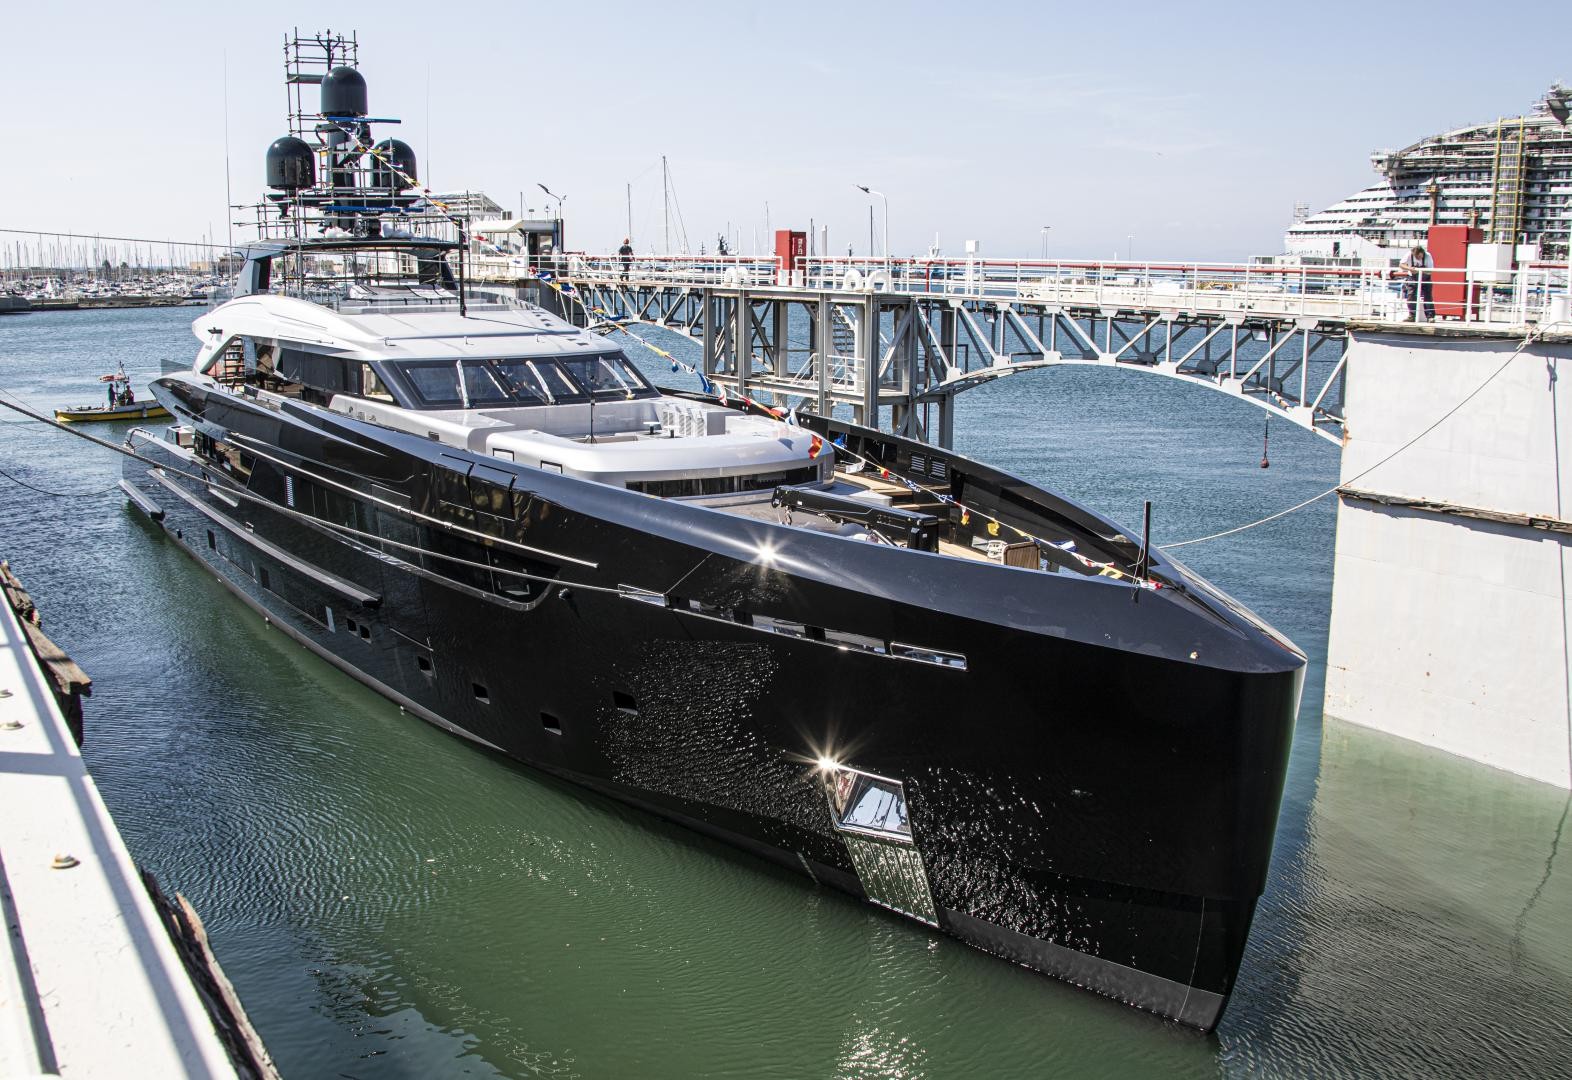 Tankoa Yachts launches M/Y Olokun, the third hull in its 50-metre